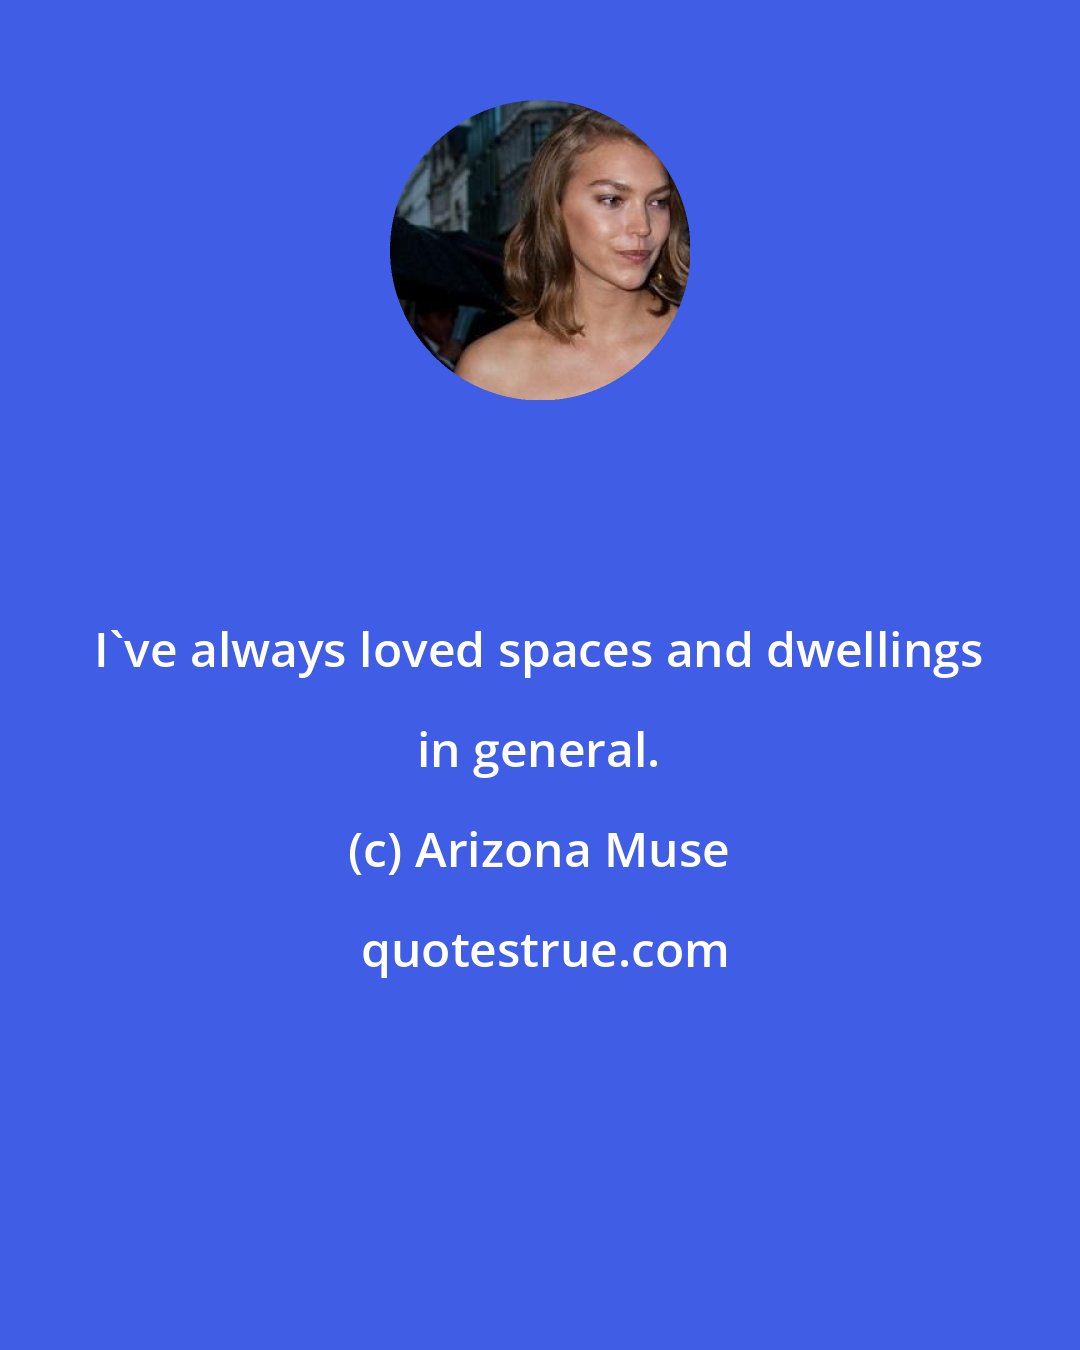 Arizona Muse: I've always loved spaces and dwellings in general.